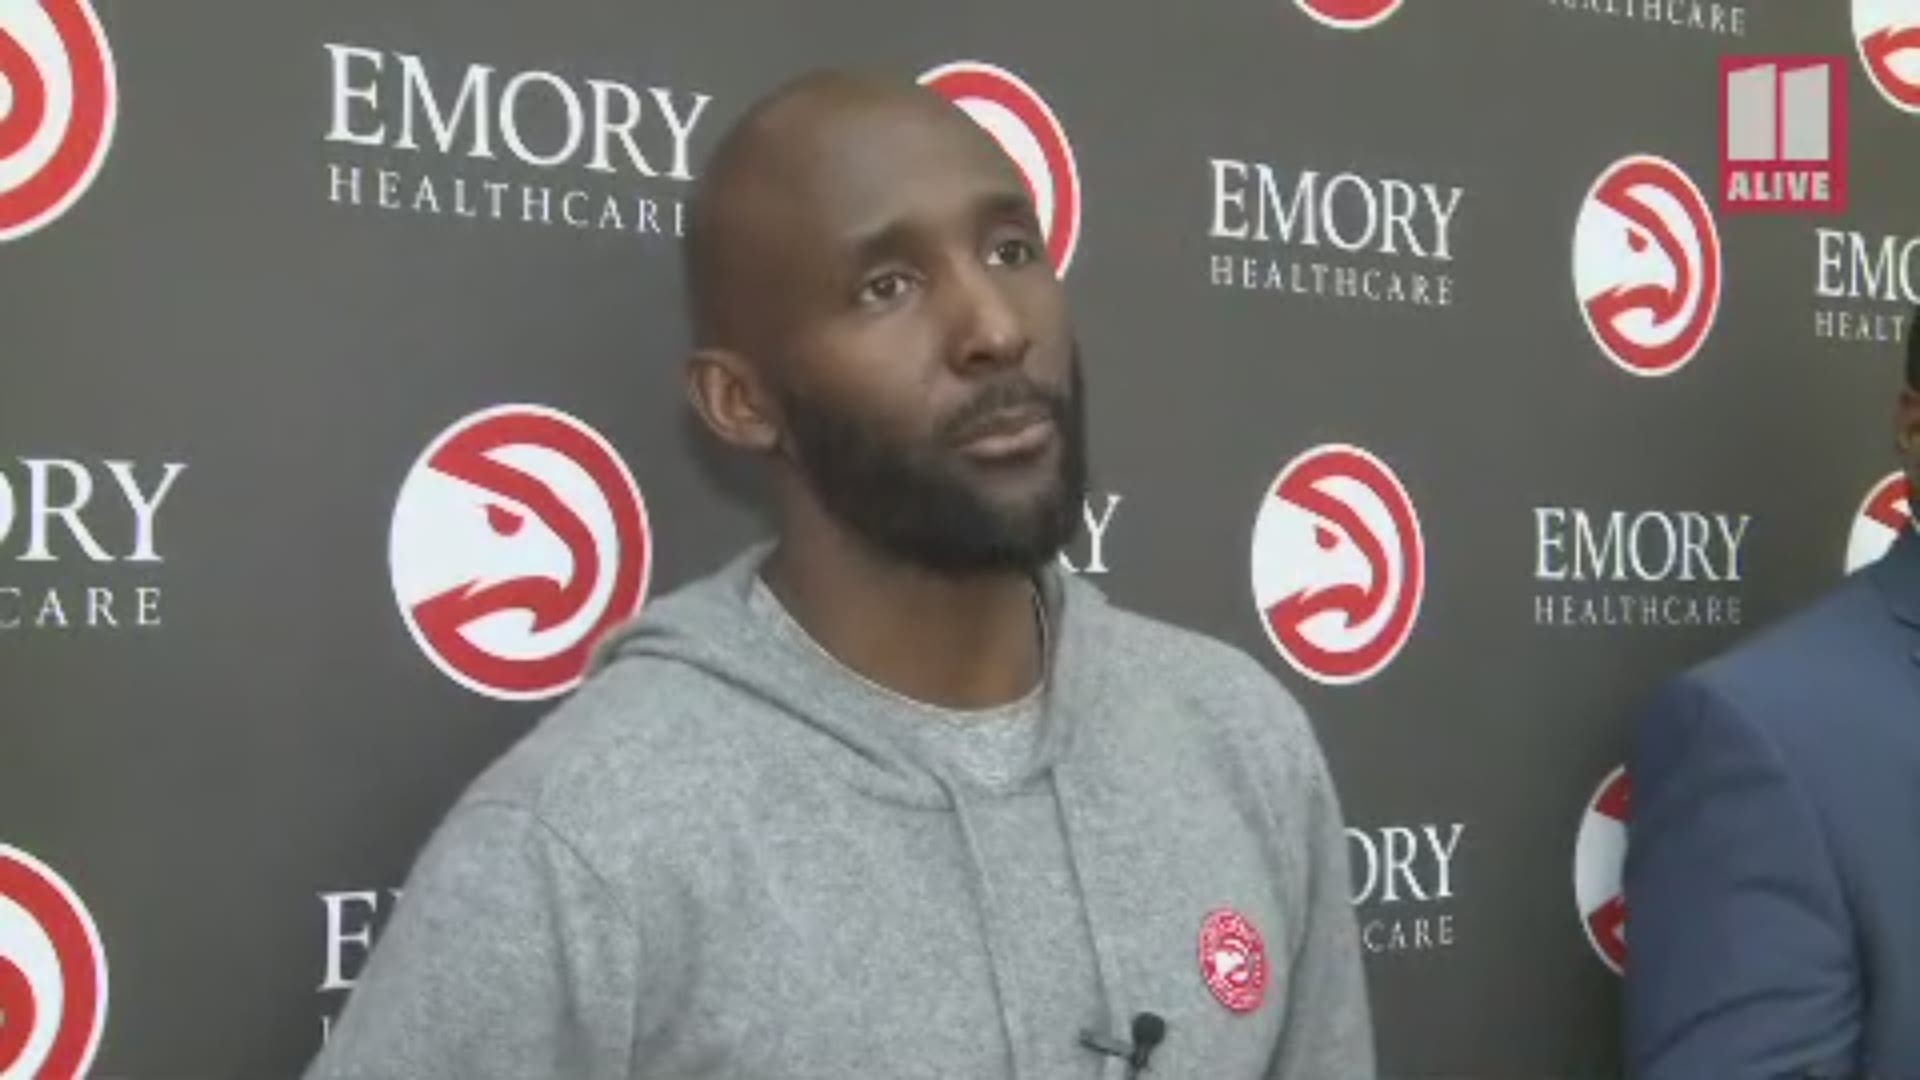 Lloyd Pierce said the team wasn't high fiving anymore, but otherwise he wasn't sure what was coming next from the NBA in its coronavirus response.